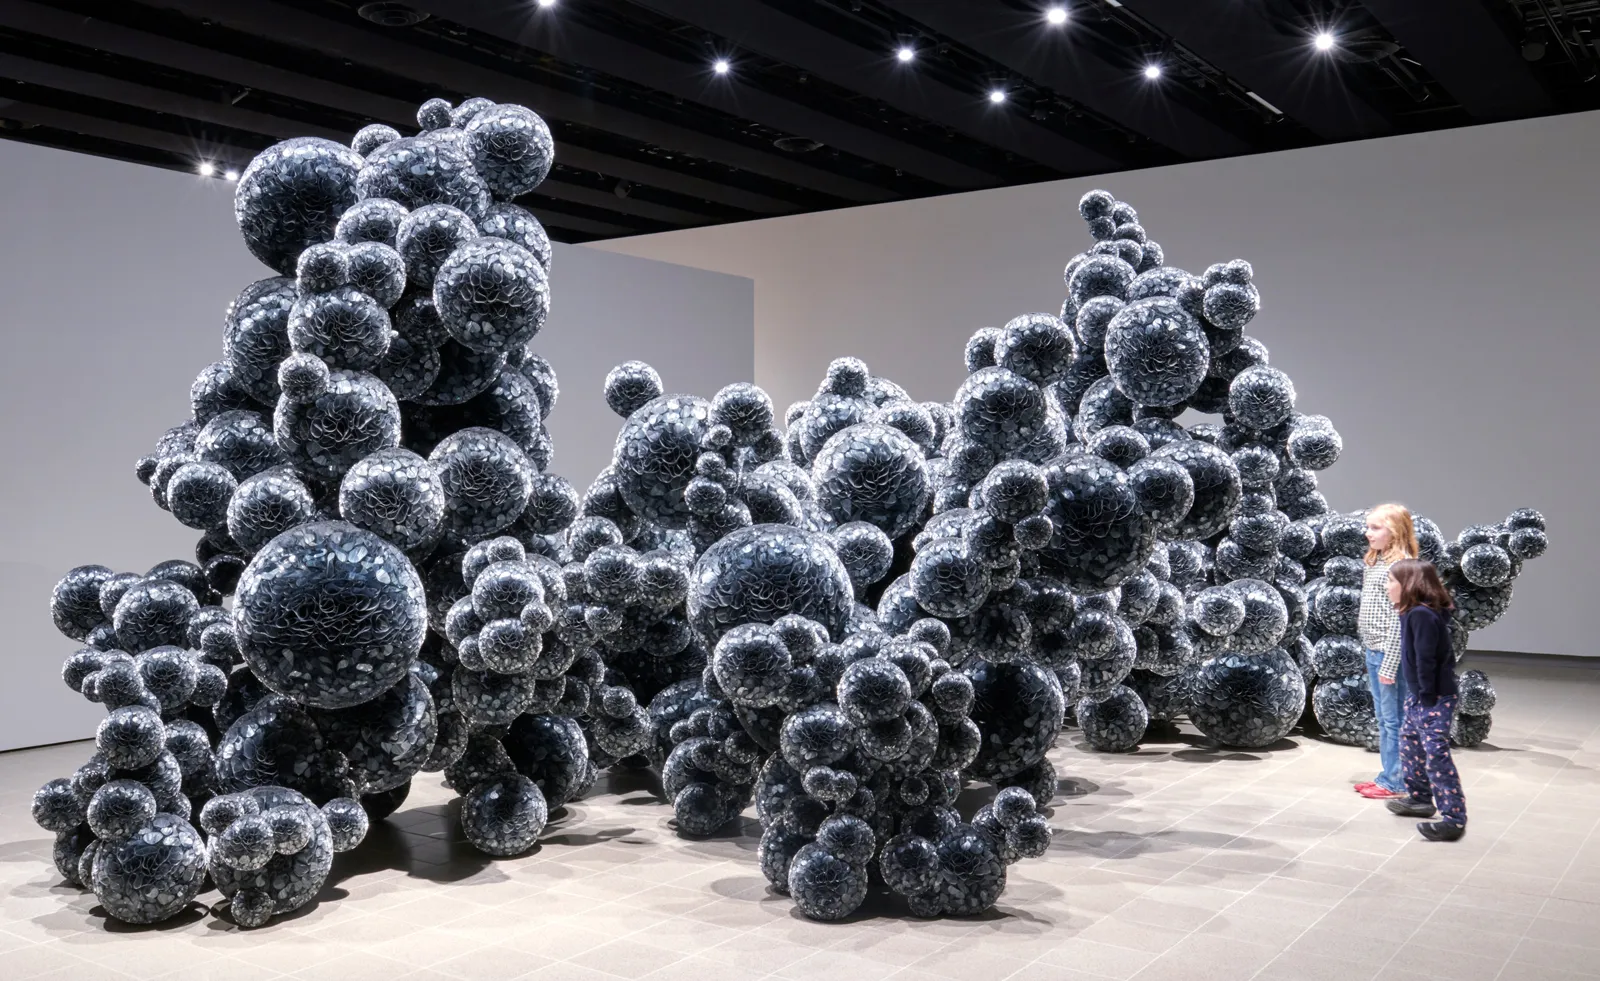 Giant, molecular-style installation inside Hayward Gallery, 'When Forms Come Alive’ exhibition